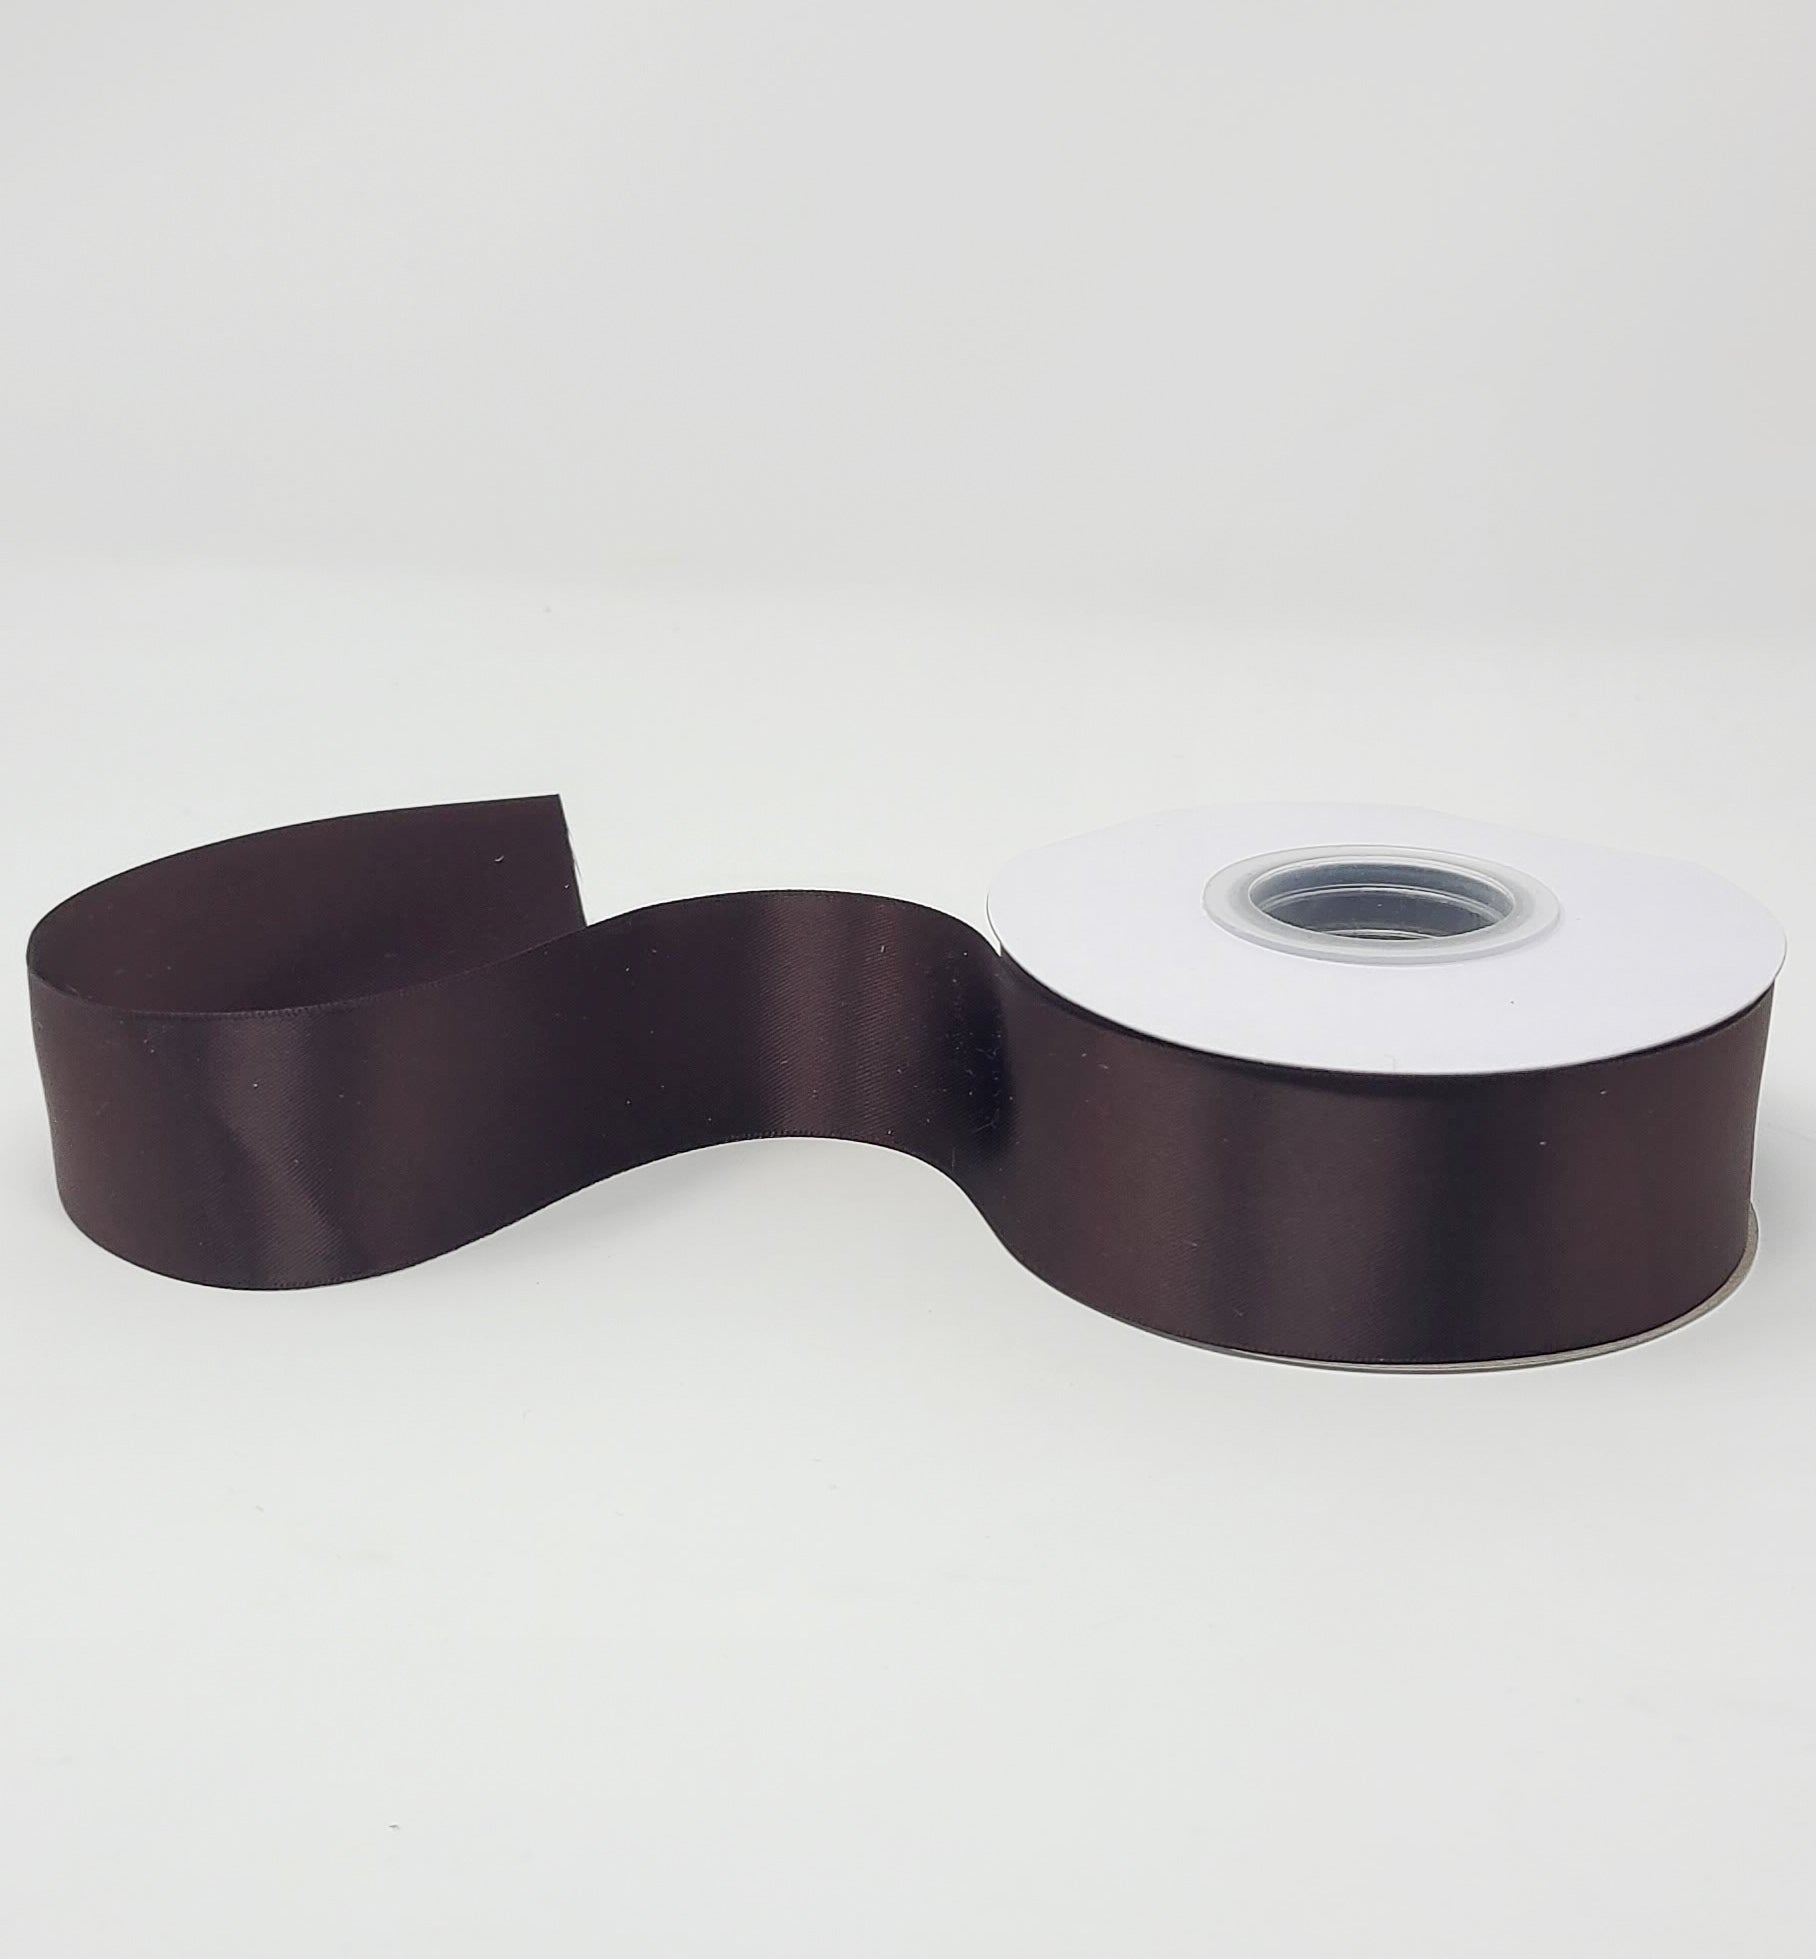 Black Coffee - Double Face 1.5 inch Solid Colored Ribbon